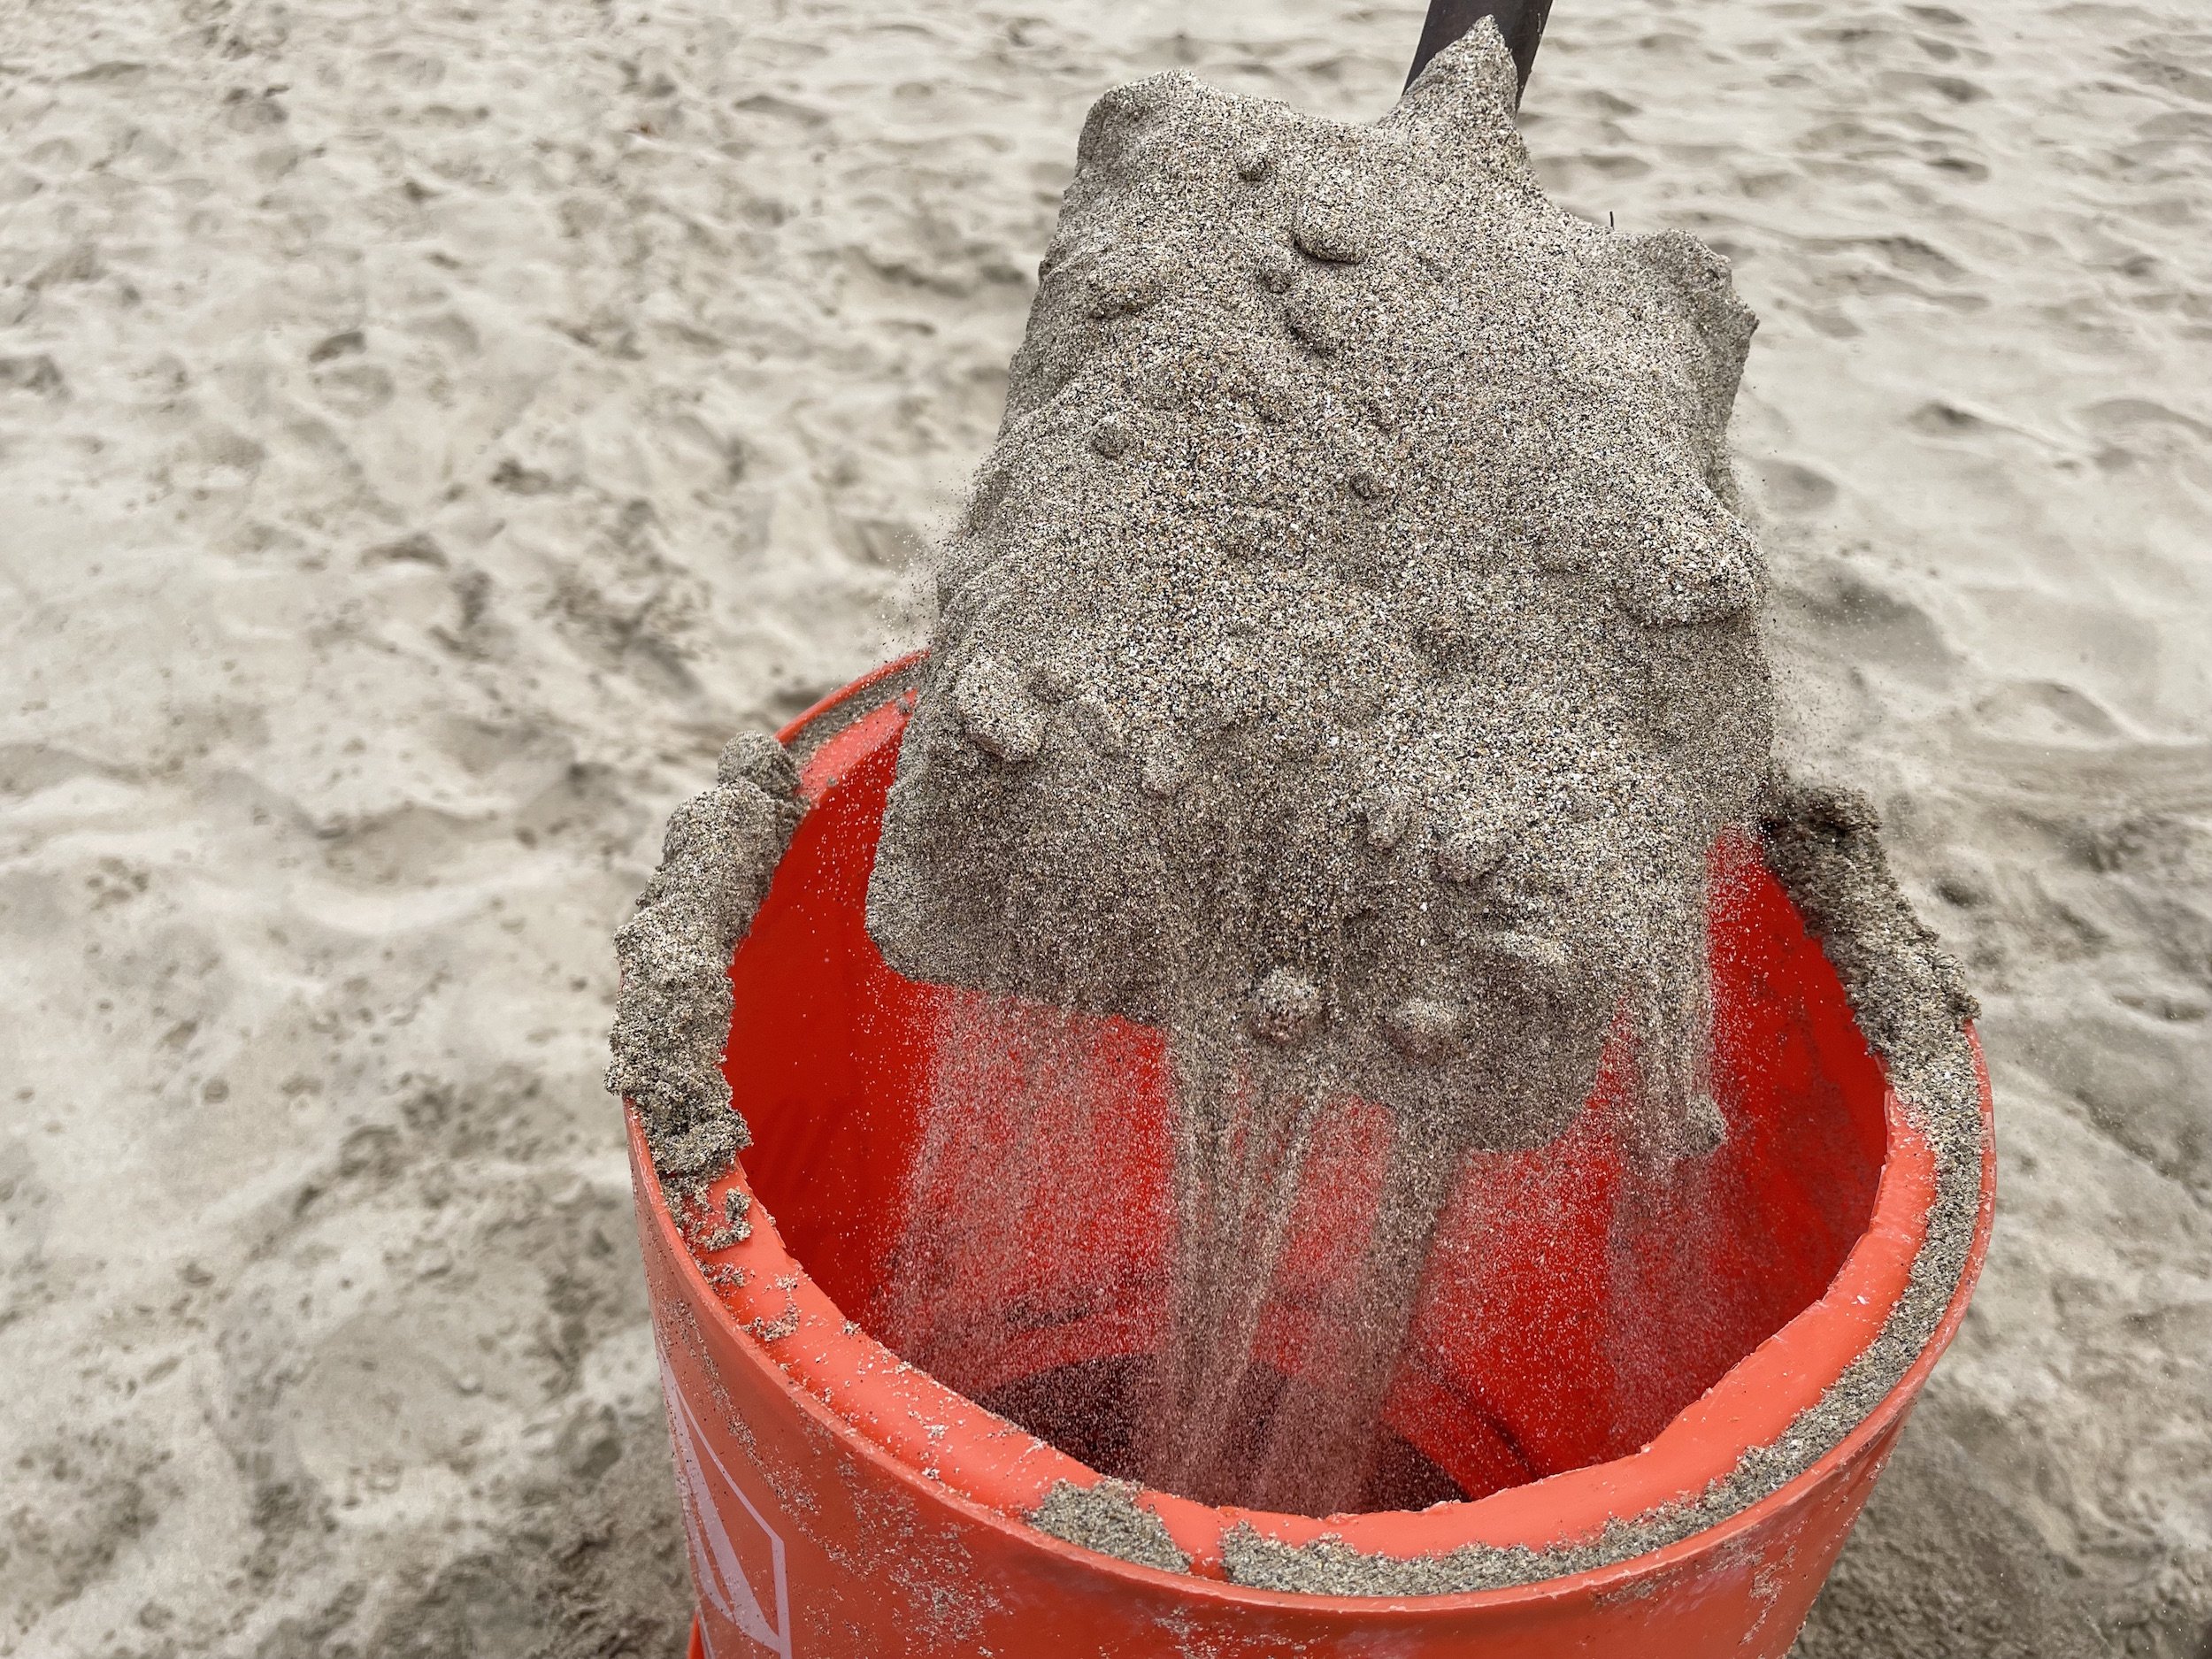 put sand in your bucket form to create a sand castle